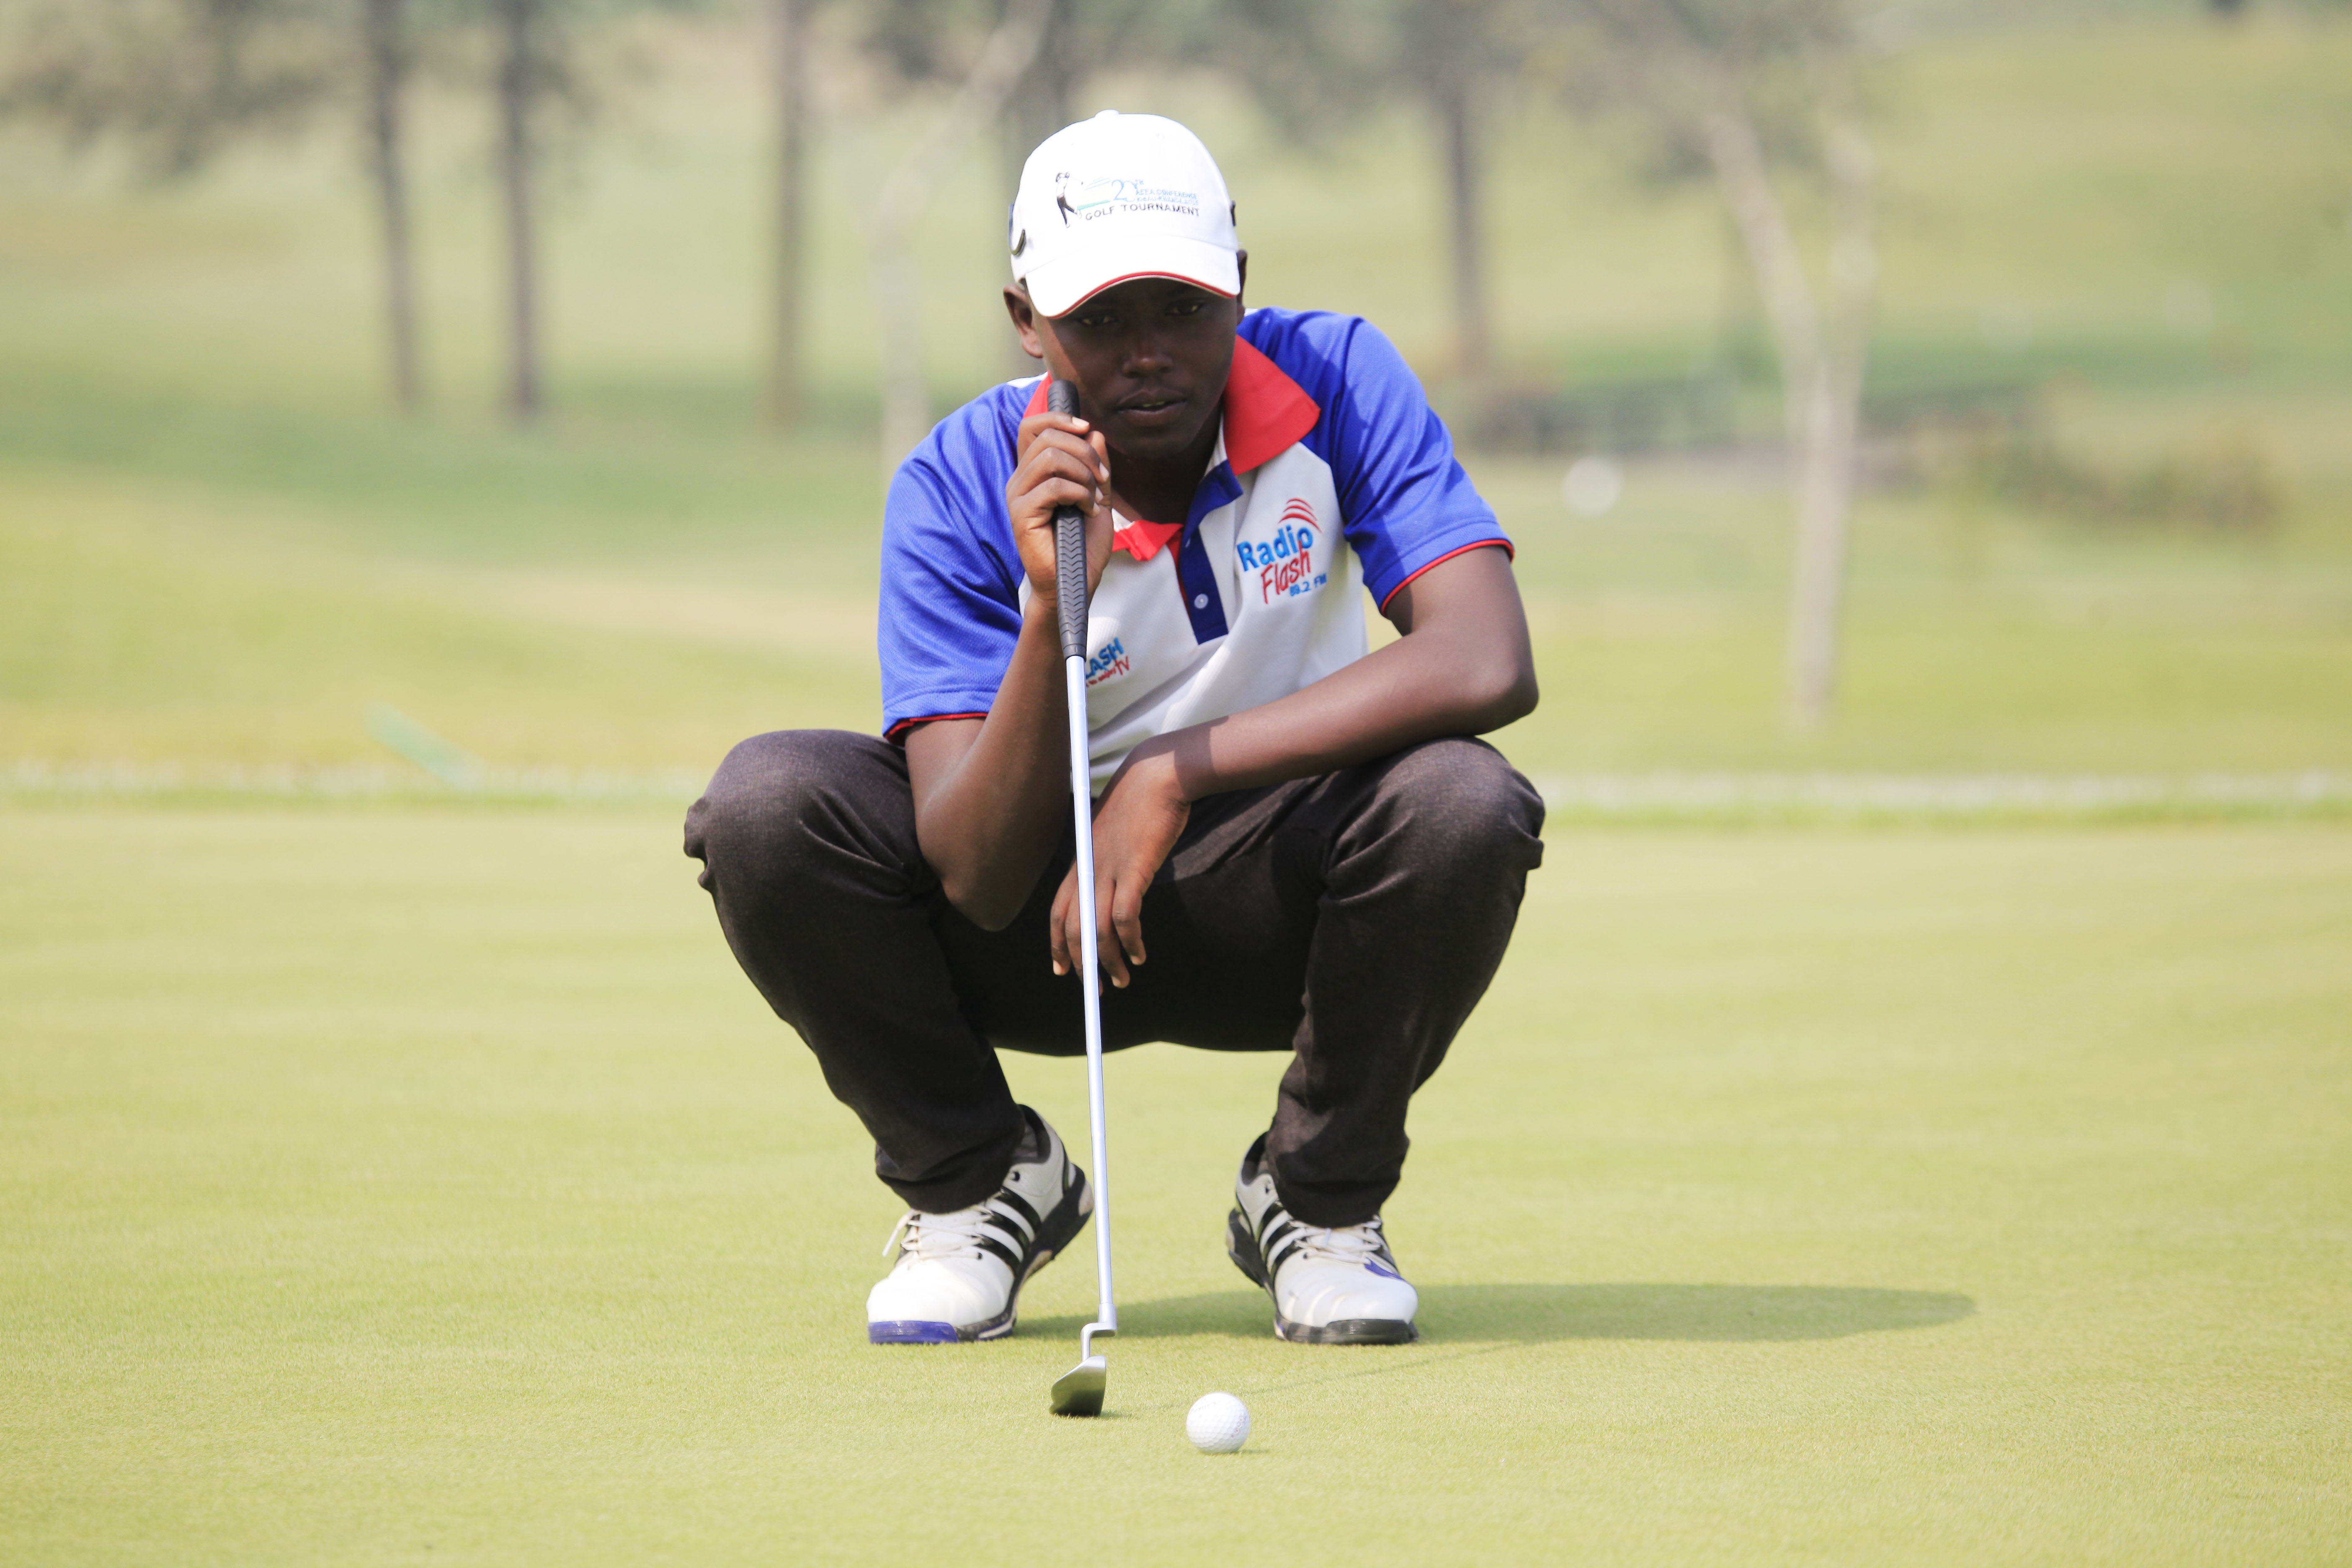 Rwandan golfer Aloys Nsabimana at the par 72 Kigali golf course. Nsabimana and his brother Celestine Nsanzuweraare are representing the country in a golf competition in Zimbabwe. Photo: Sam Ngendahimana.